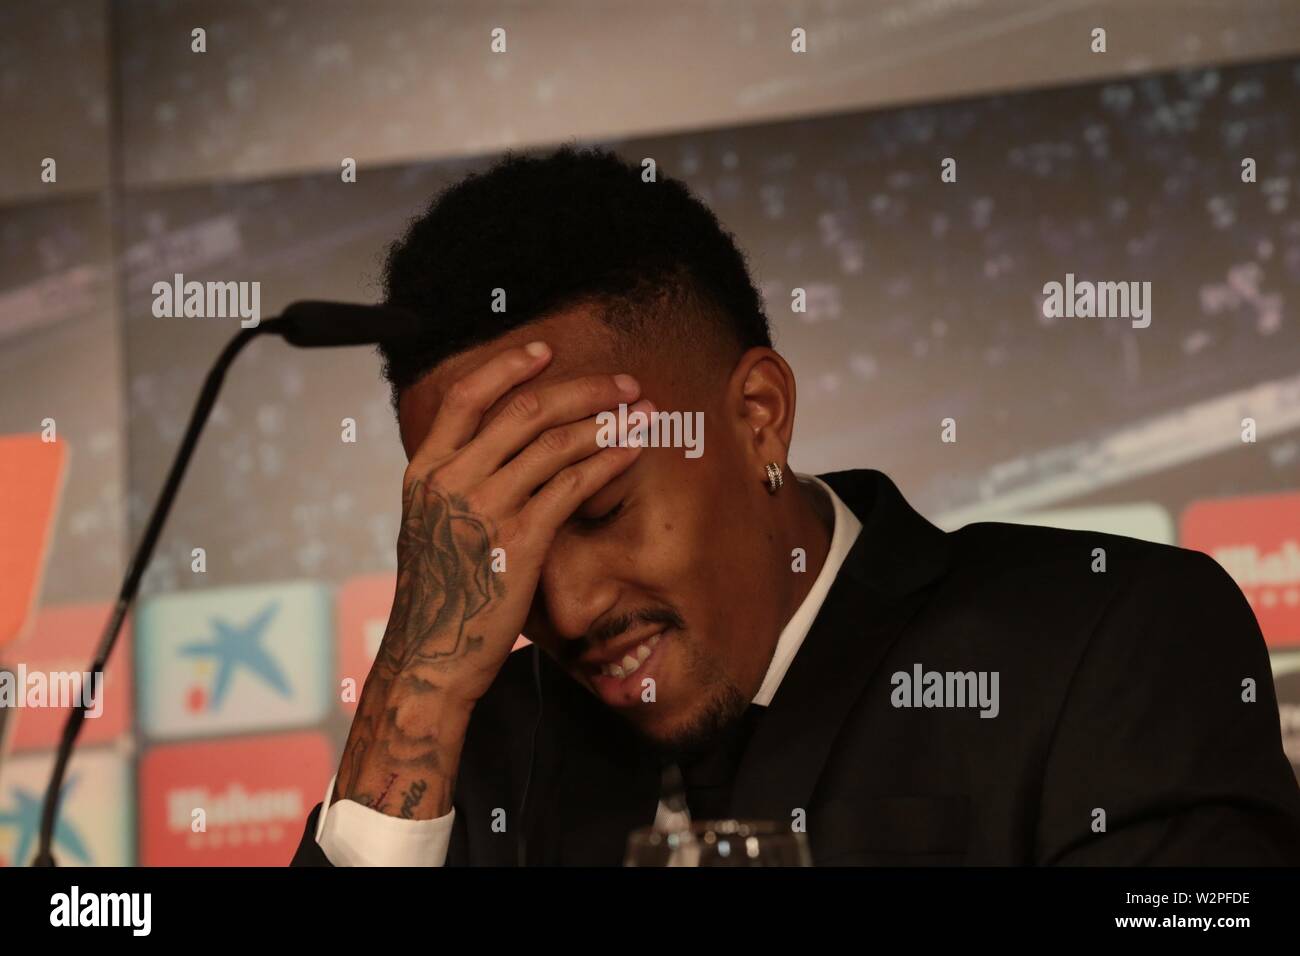 Madrid, Spain. 10th July, 2019. Madrid, Spain; 10/07/2019.Eder Militao new Real Madrid player, press conferens, leaves the press room for not feeling well? Santiago Bernabeu Stadium. Credit: Juan Carlos Rojas/Picture Alliance | usage worldwide/dpa/Alamy Live News Stock Photo